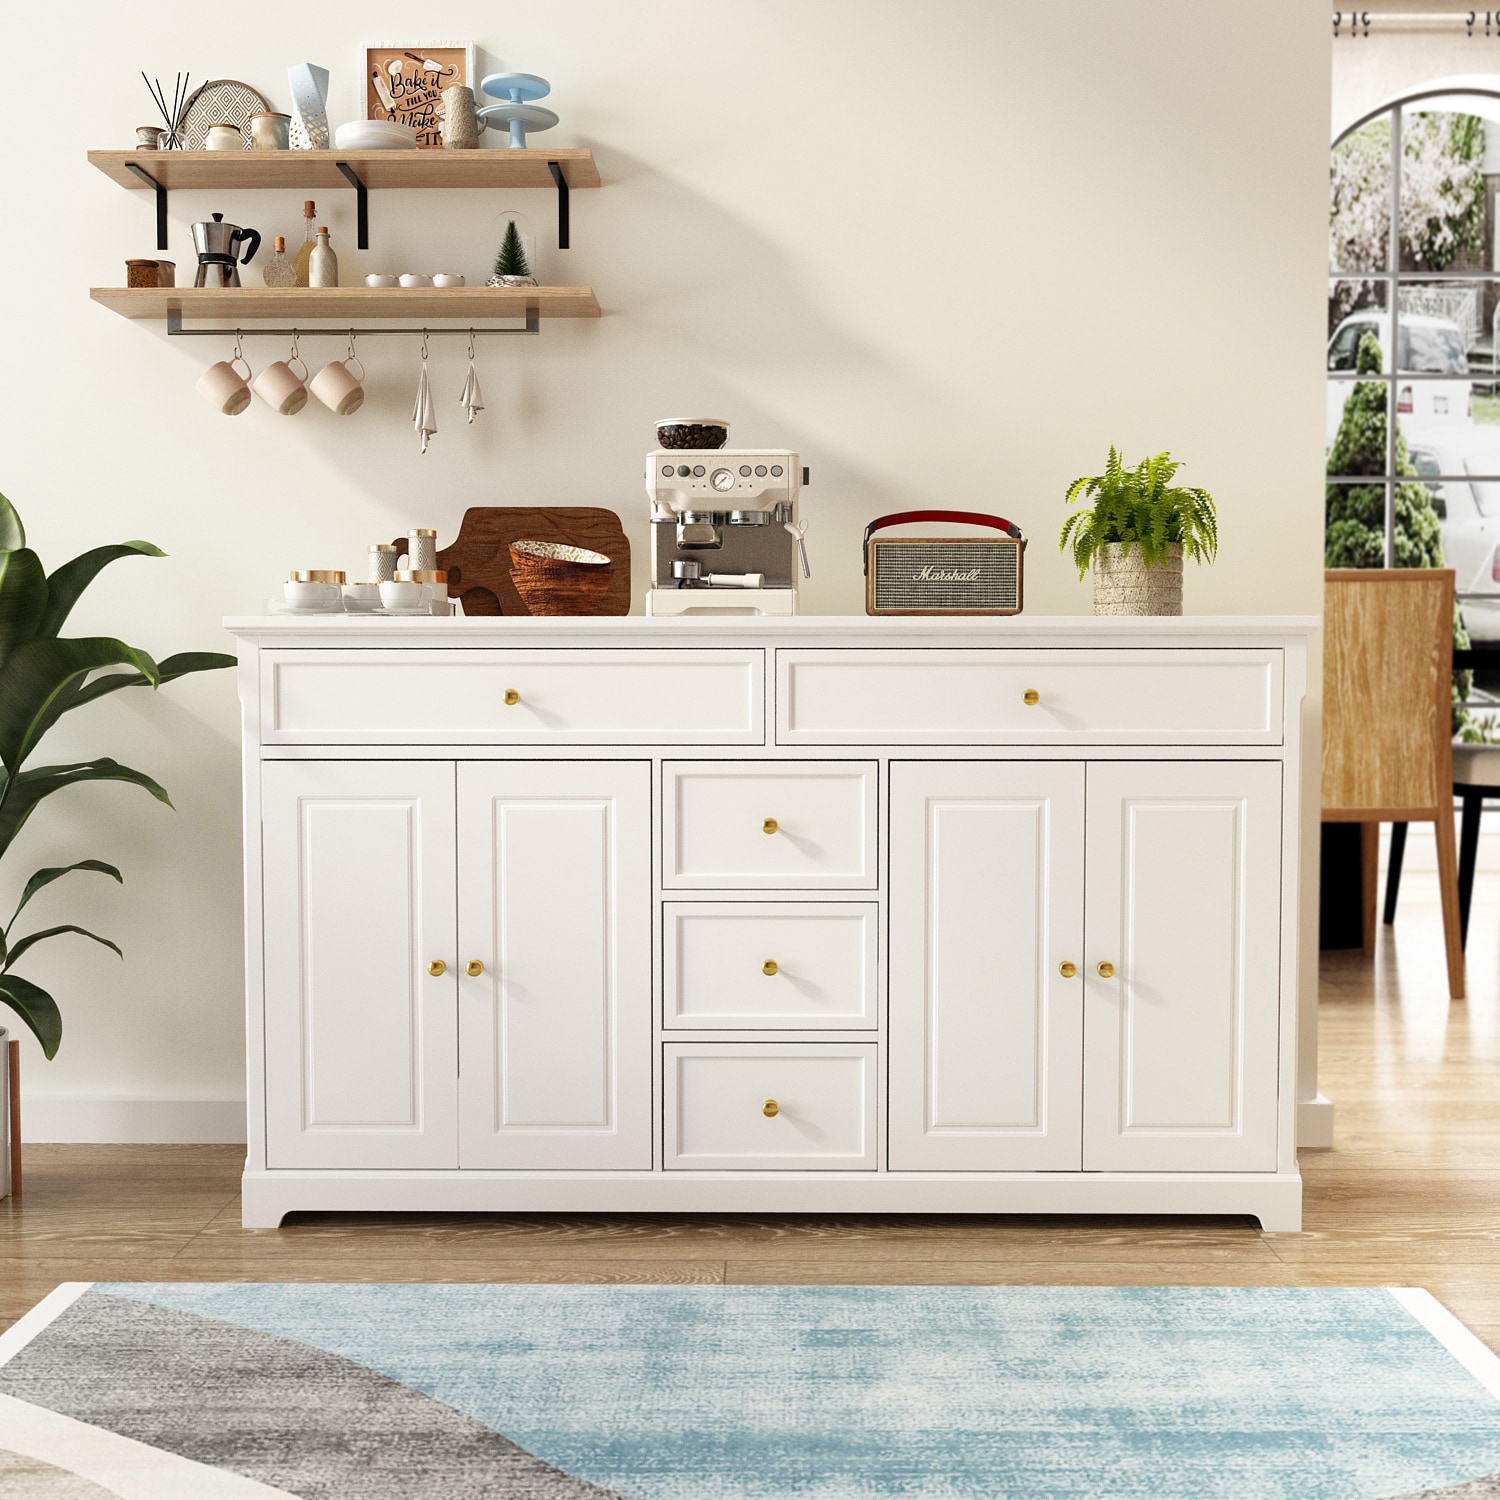  Scurrty 30'' Small Buffet Cabinet with Storage Sideboard,  Coffee Bar Cabinet Kitchen Buffet White Storage Cabinet, Coffee  Station,Kitchen Pantry for Dinning Room, Kitchen, Living Room (Blue) -  Buffets & Sideboards